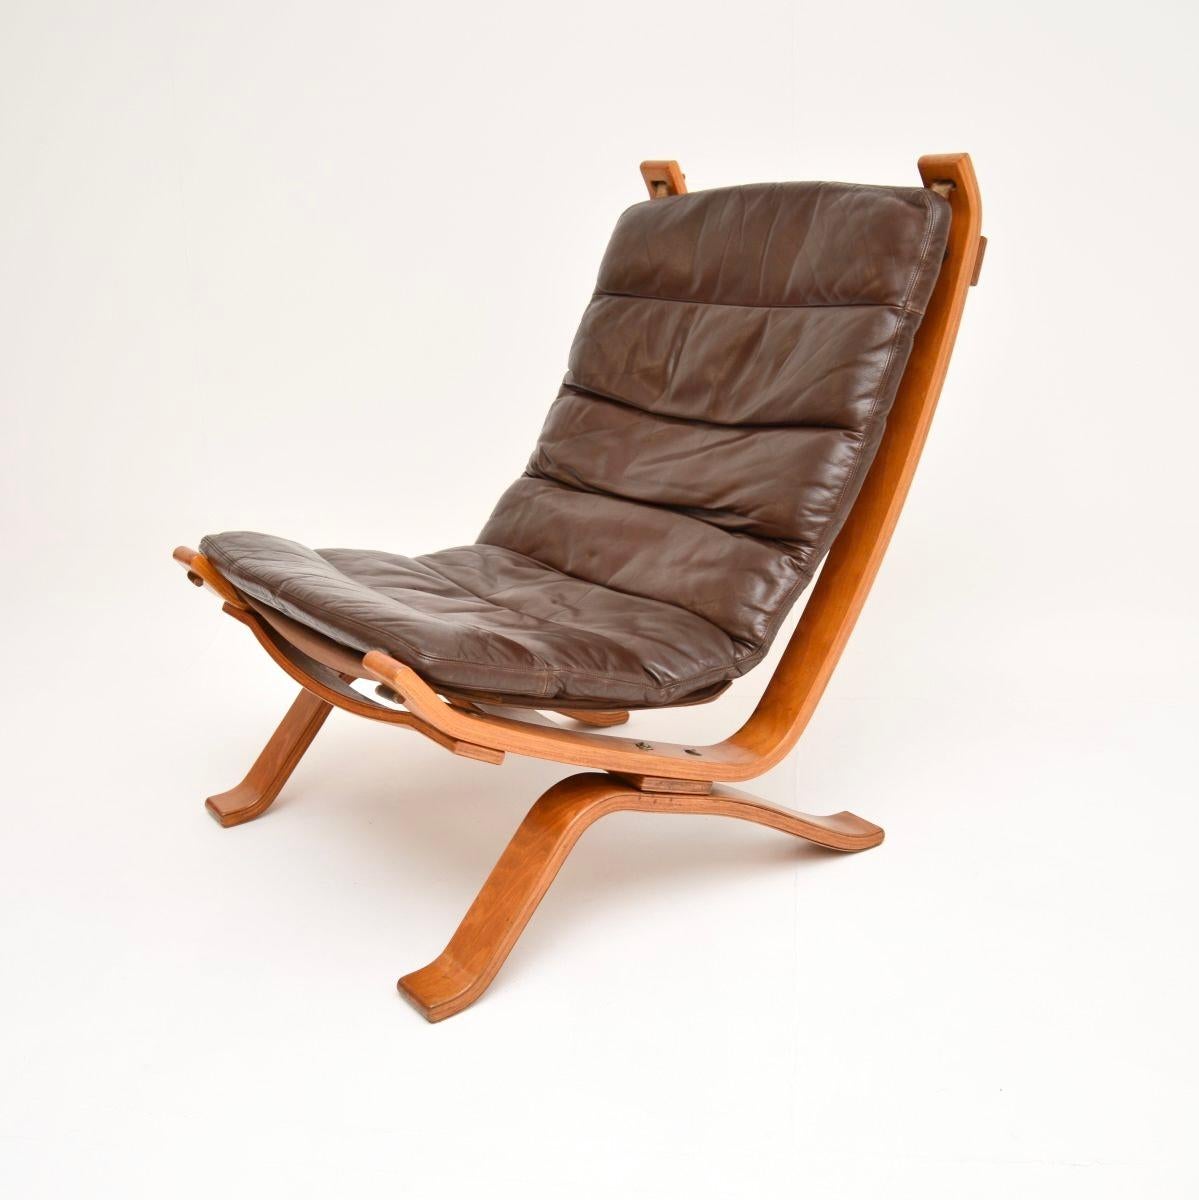 Late 20th Century Danish Vintage Leather Lounge Chair by Bramin